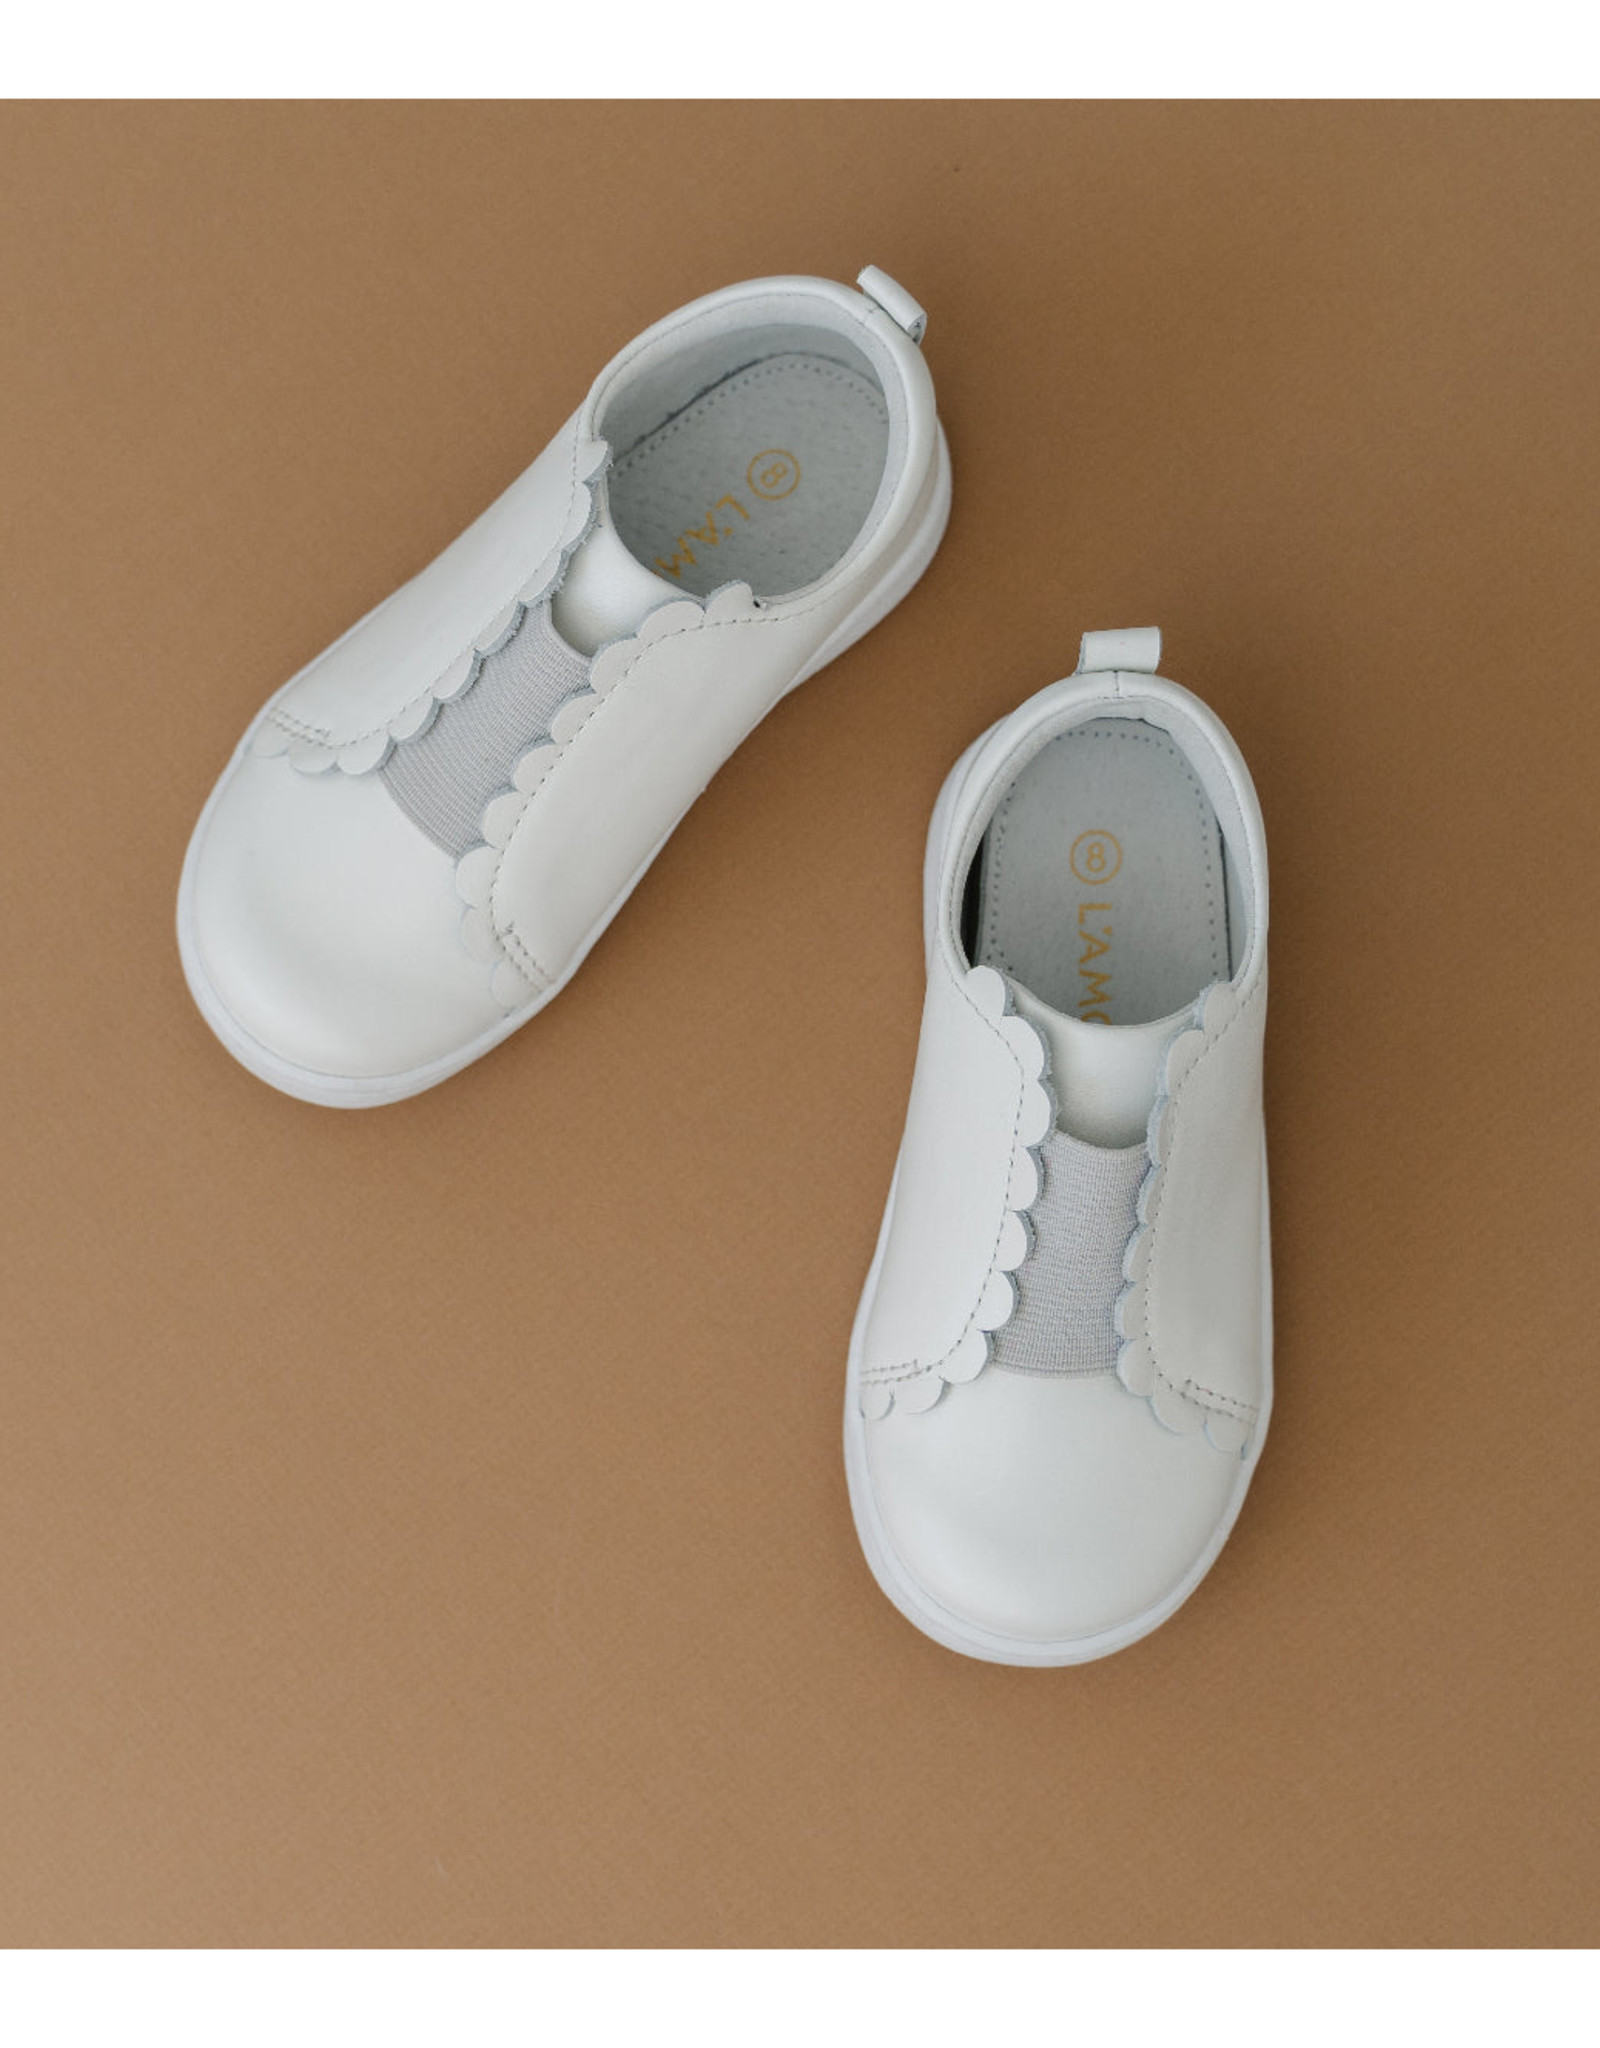 L'Amour 682 Phoebe Sneaker White